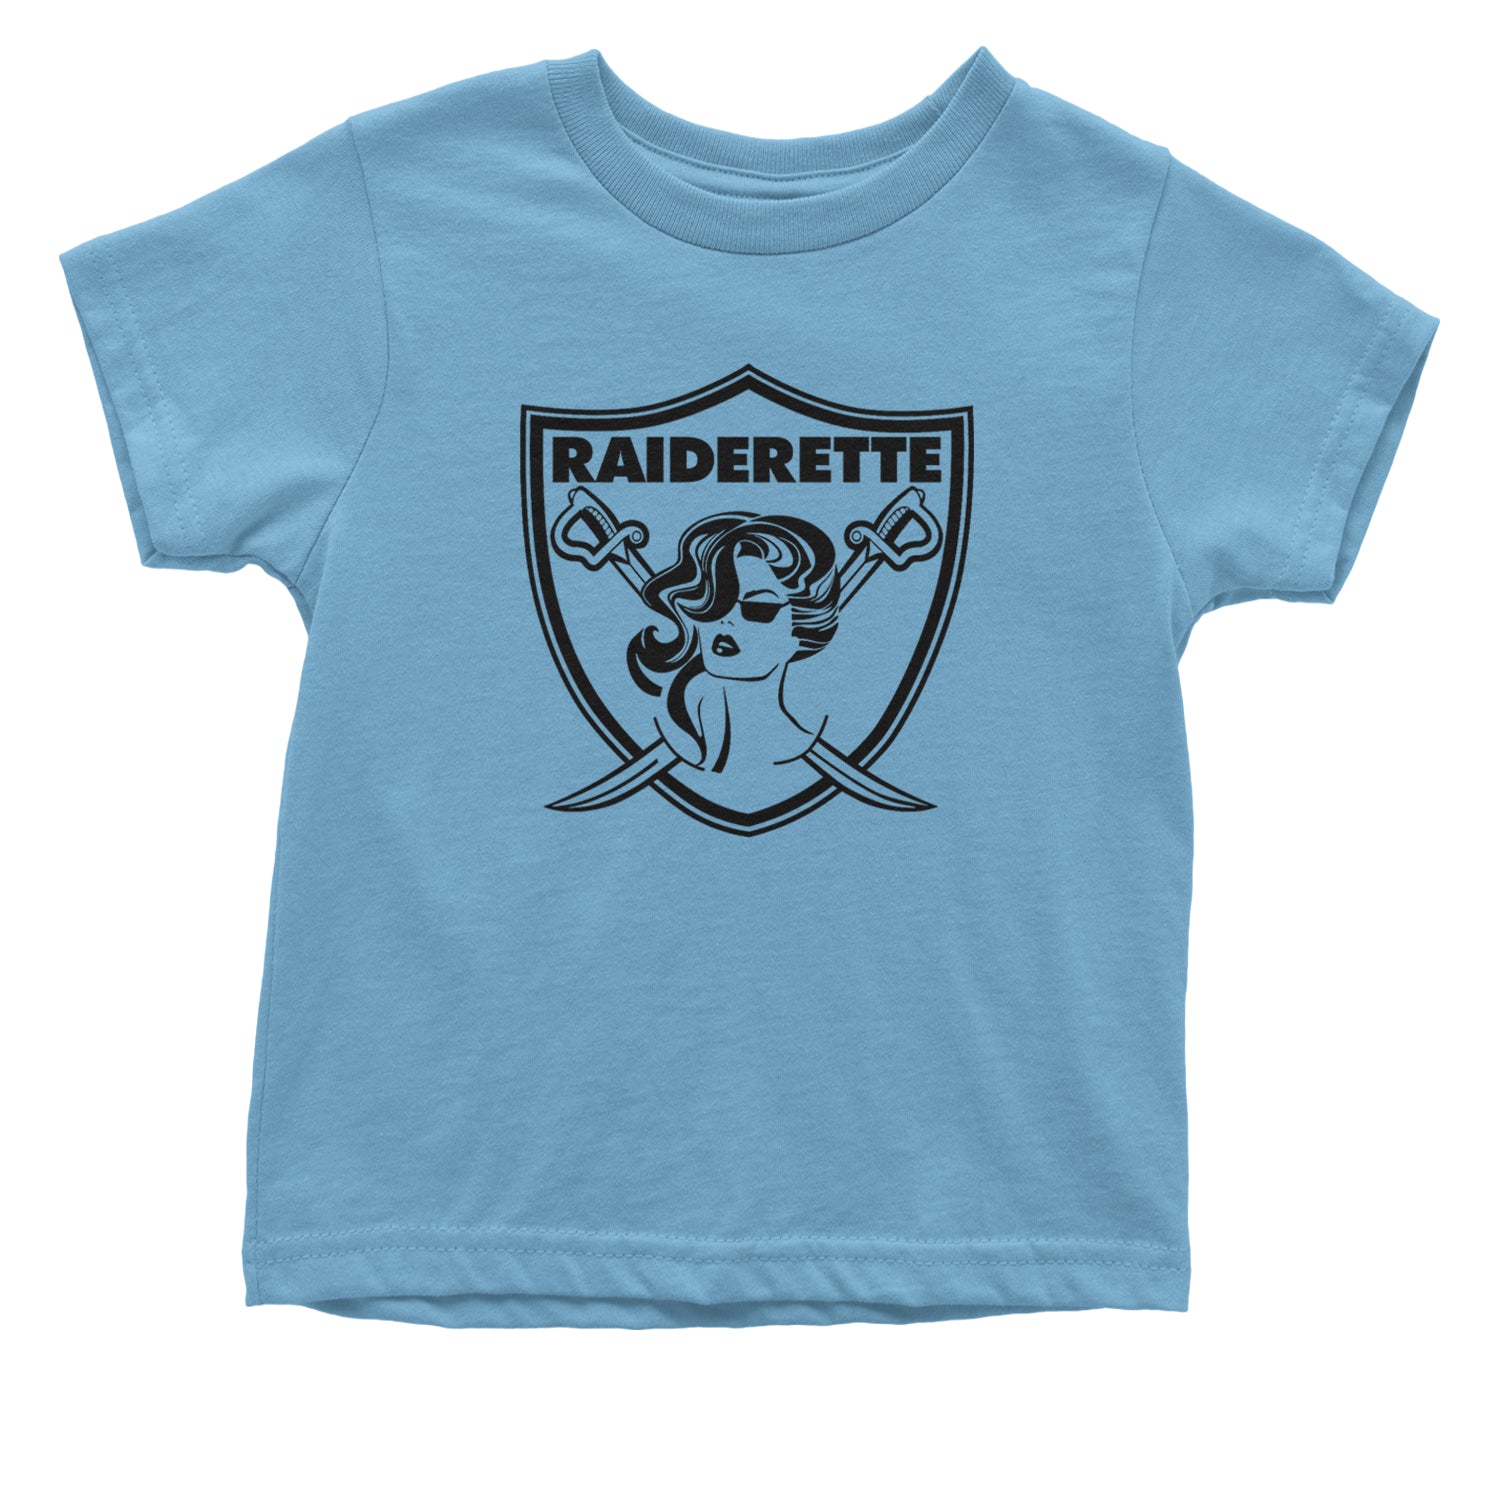 Raiderette Football Gameday Ready Infant One-Piece Romper Bodysuit and Toddler T-shirt Light Blue